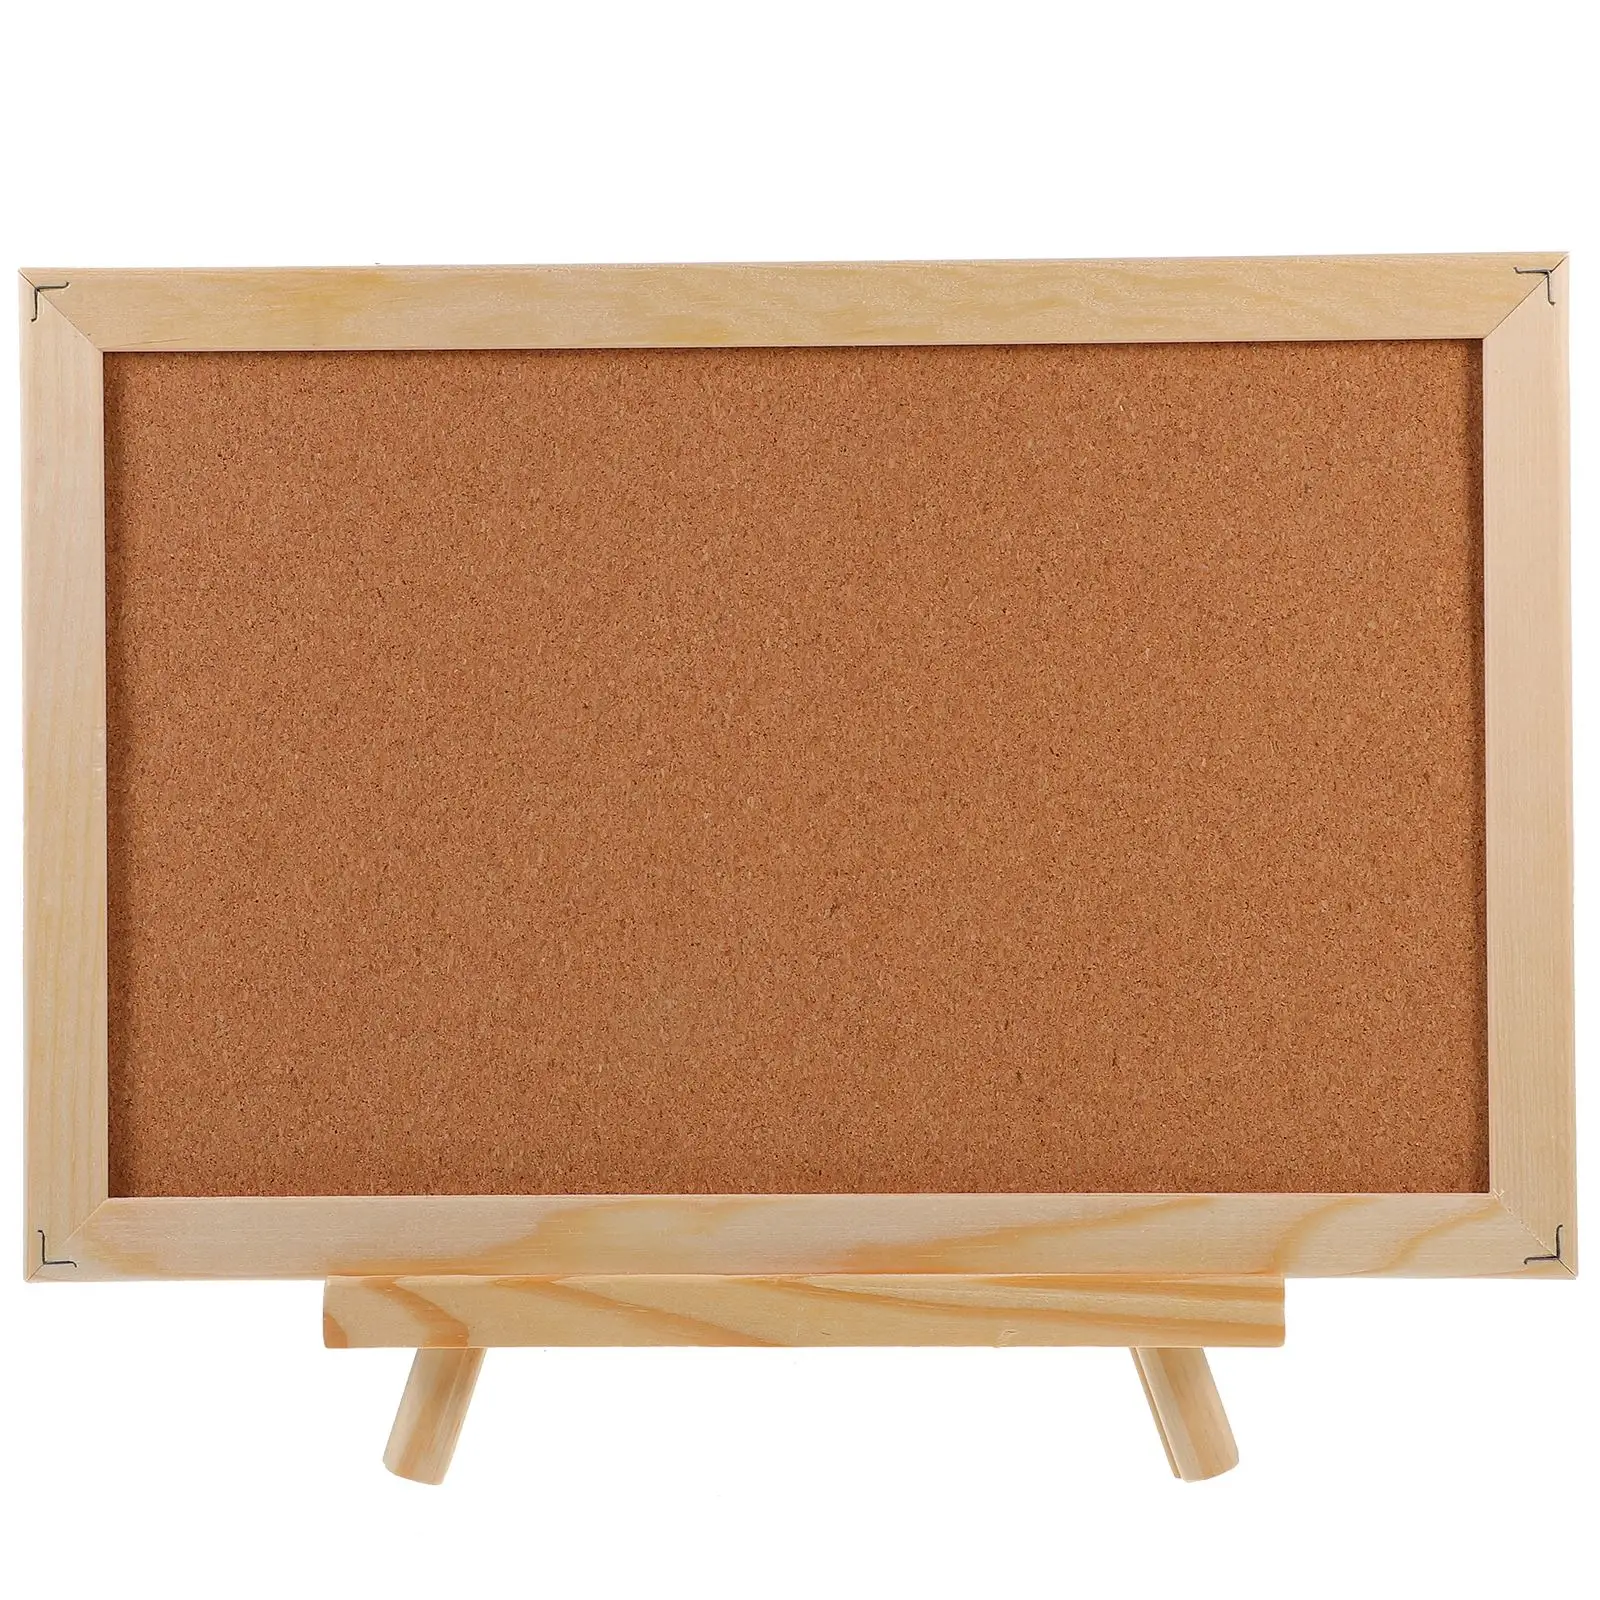 Durable Cork Wood Wall Hanging Message Bulletin Board Frame Notice Note Memo Board For Home Office Shop School Photo Background cork board bulletin board message boards wooden pin memo board notice board for home office rose gold base